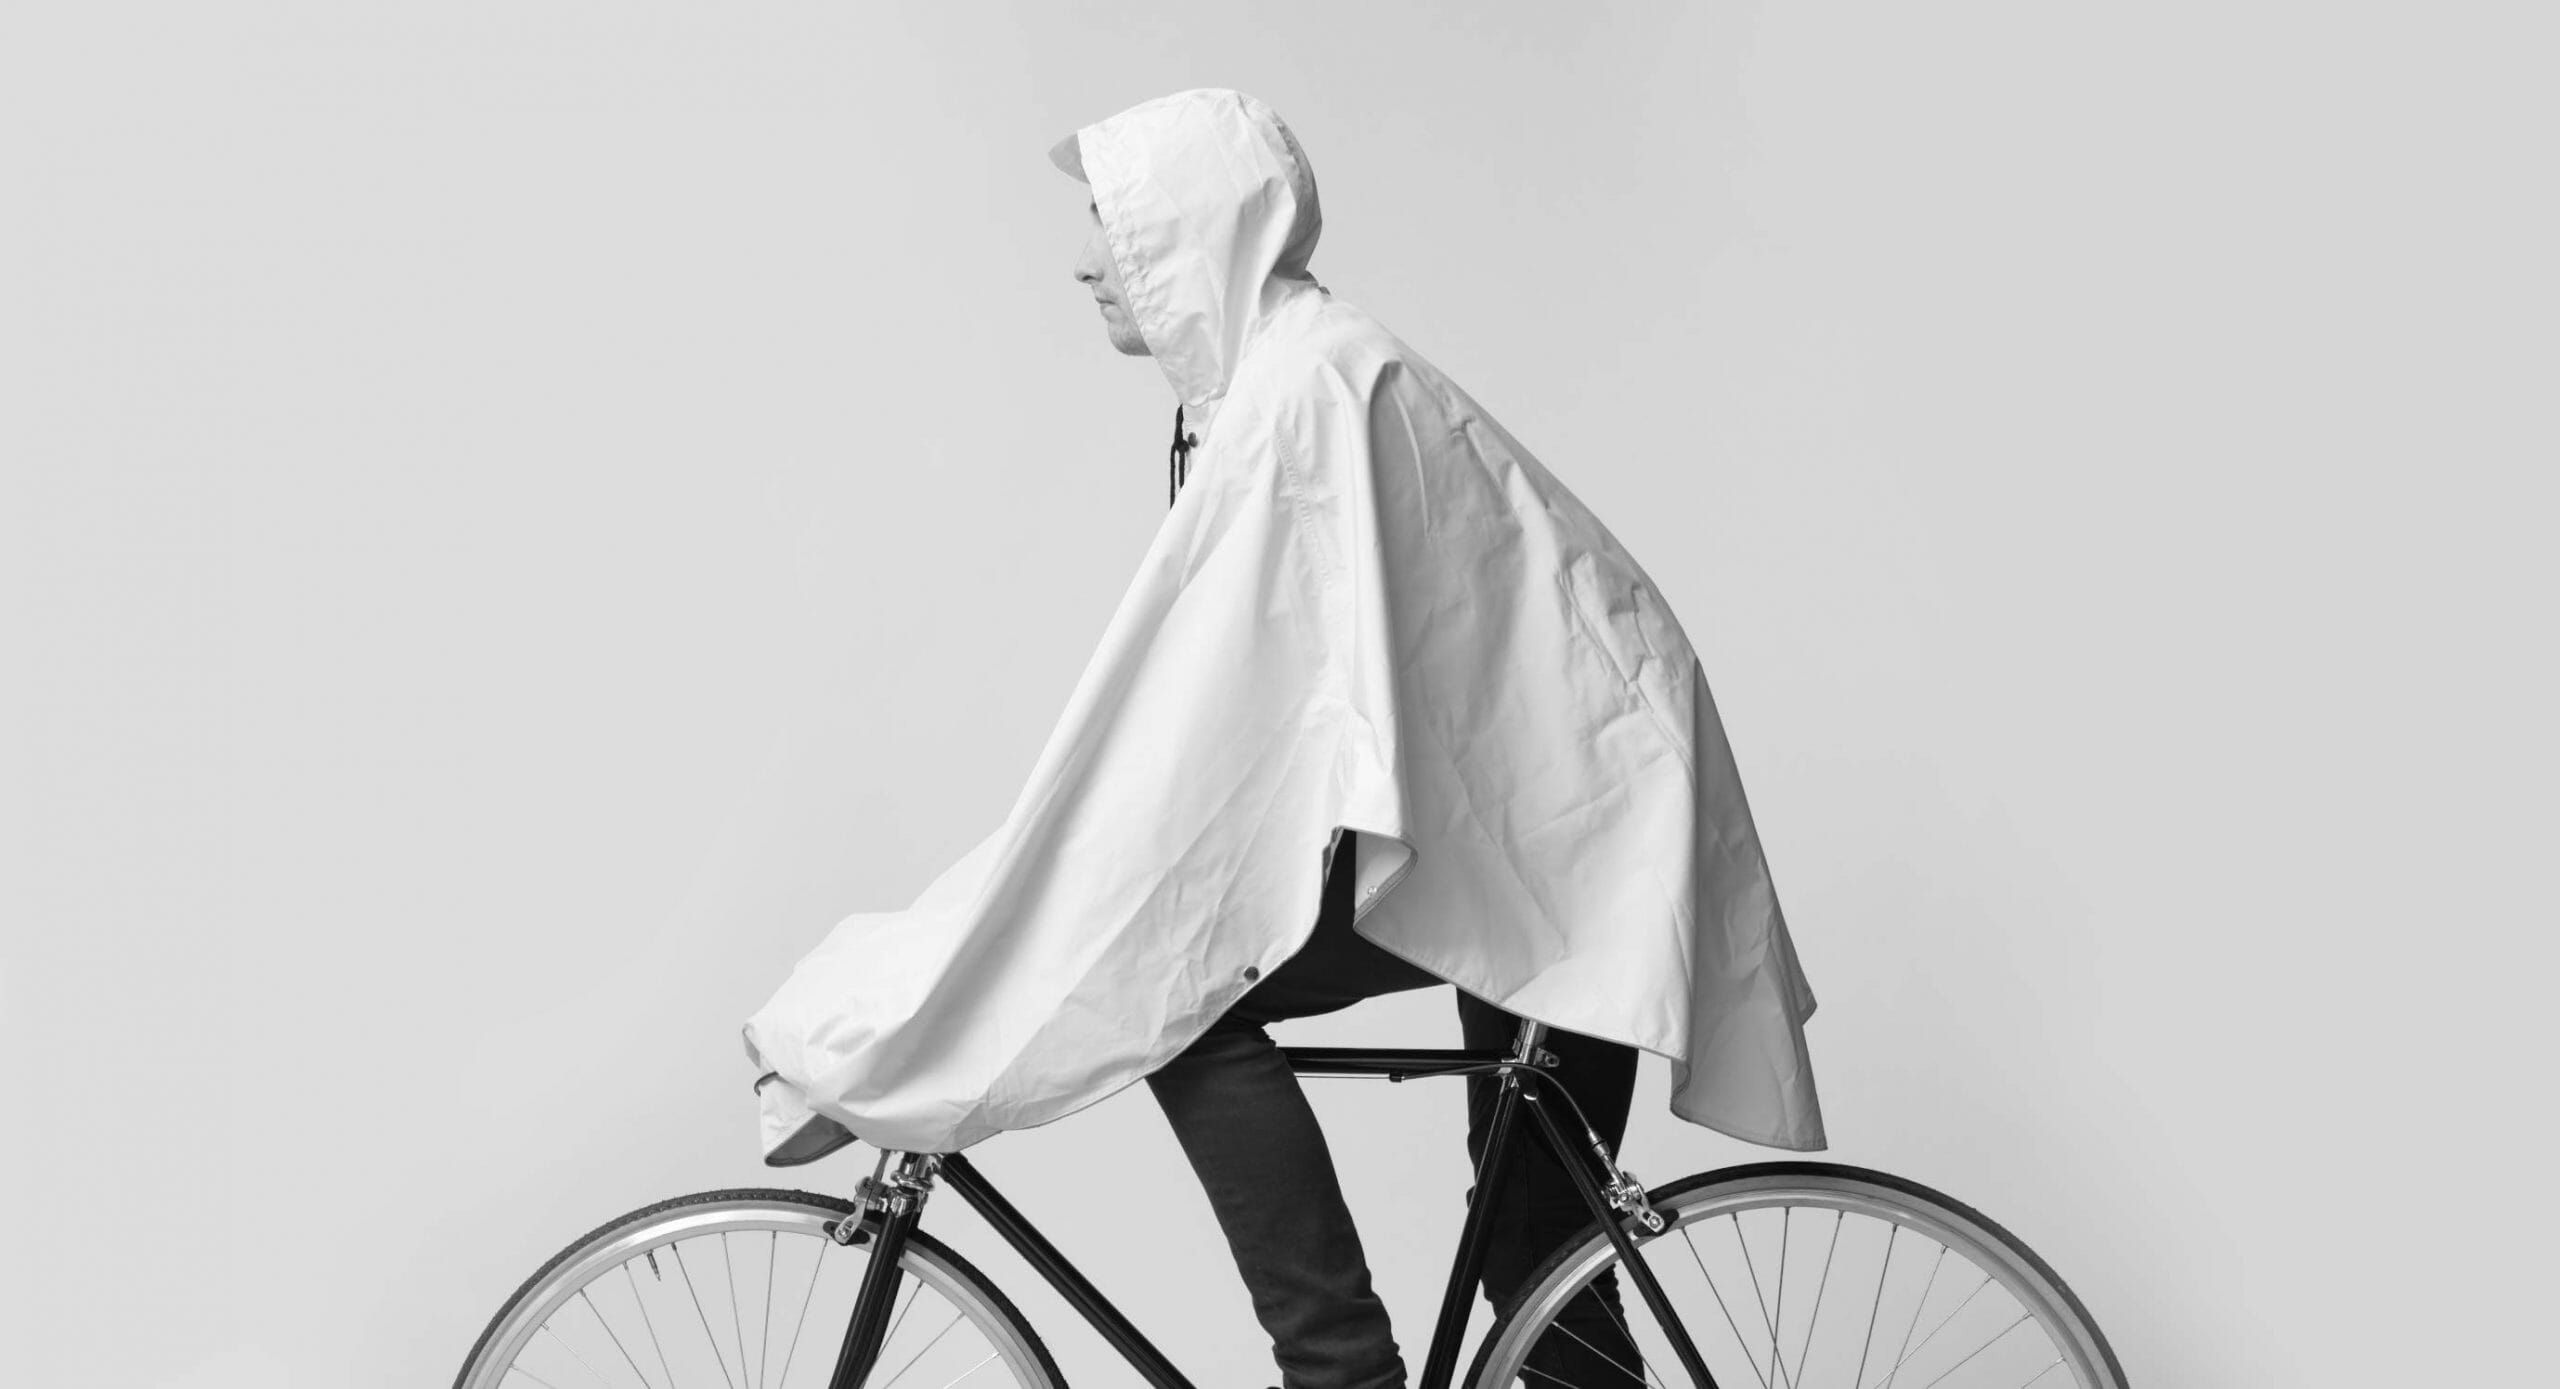 Brand focus: The People's Poncho